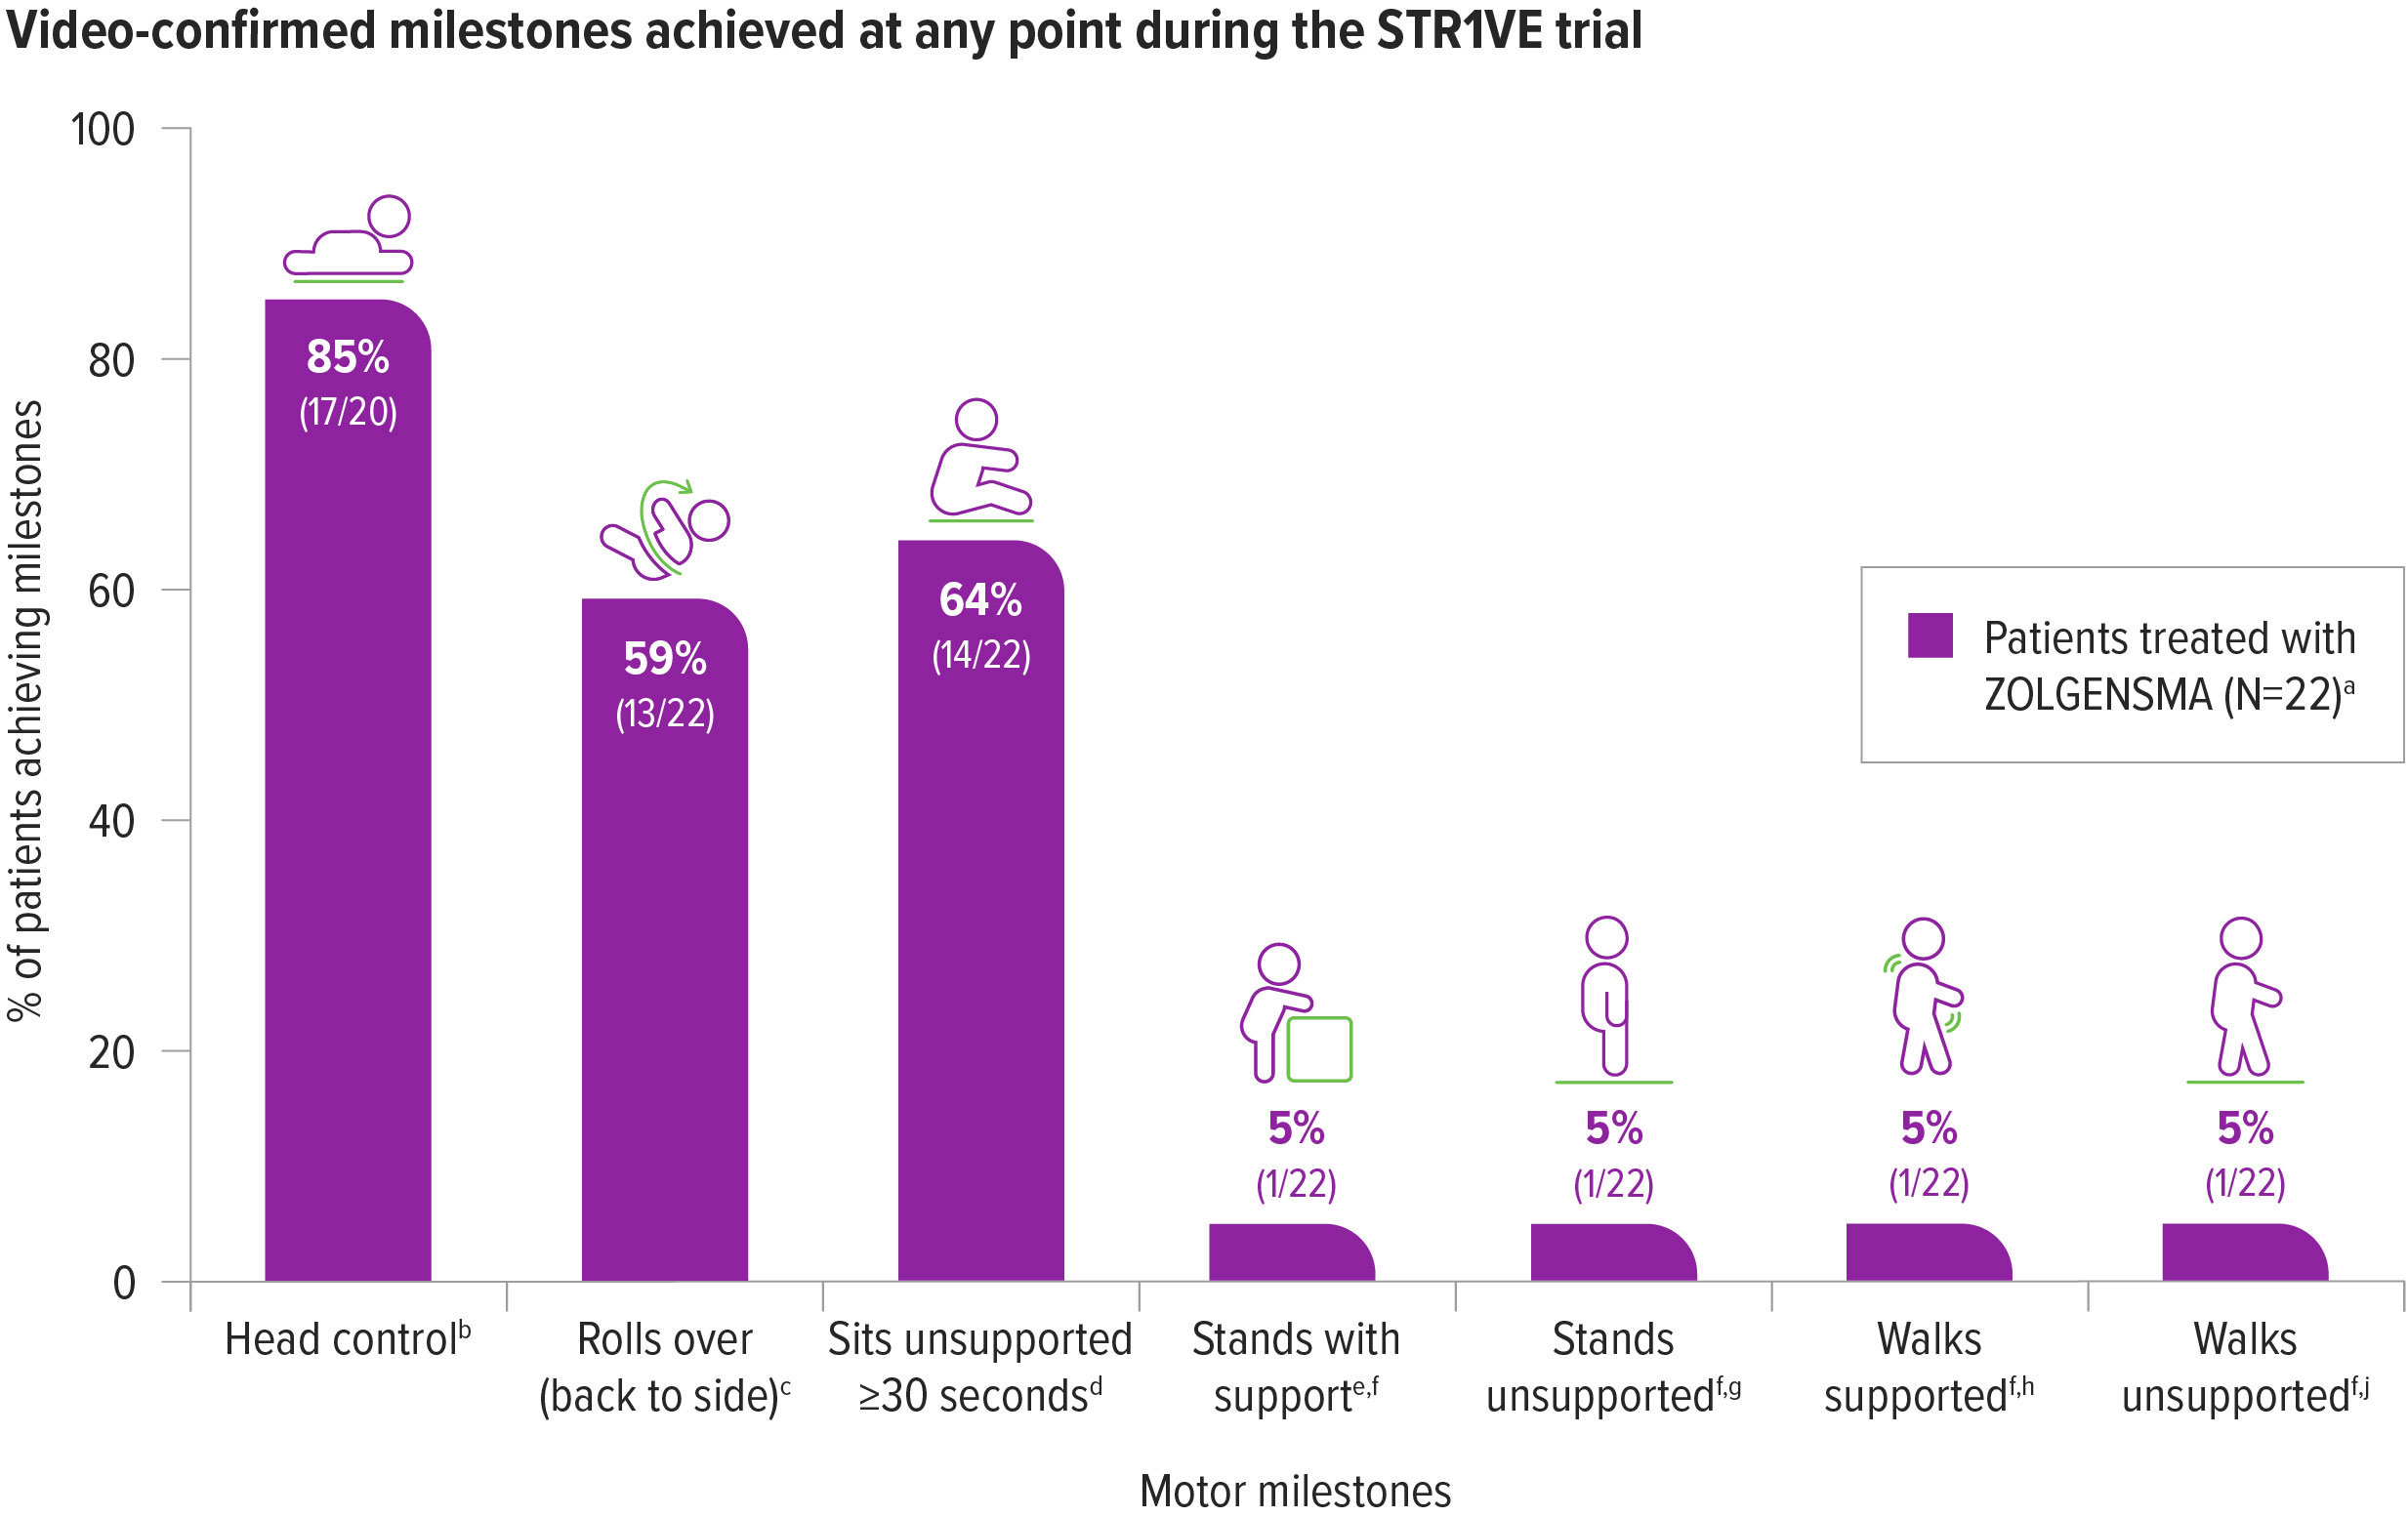 Chart: Motor milestones patients achieved after treatment with ZOLGENSMA in the Phase 3 STR1VE clinical trial for spinal muscular atrophy: head control, rolls over (back to side), sitting unsupported, standing with support, standing unsupported, walking supported, walking unsupported